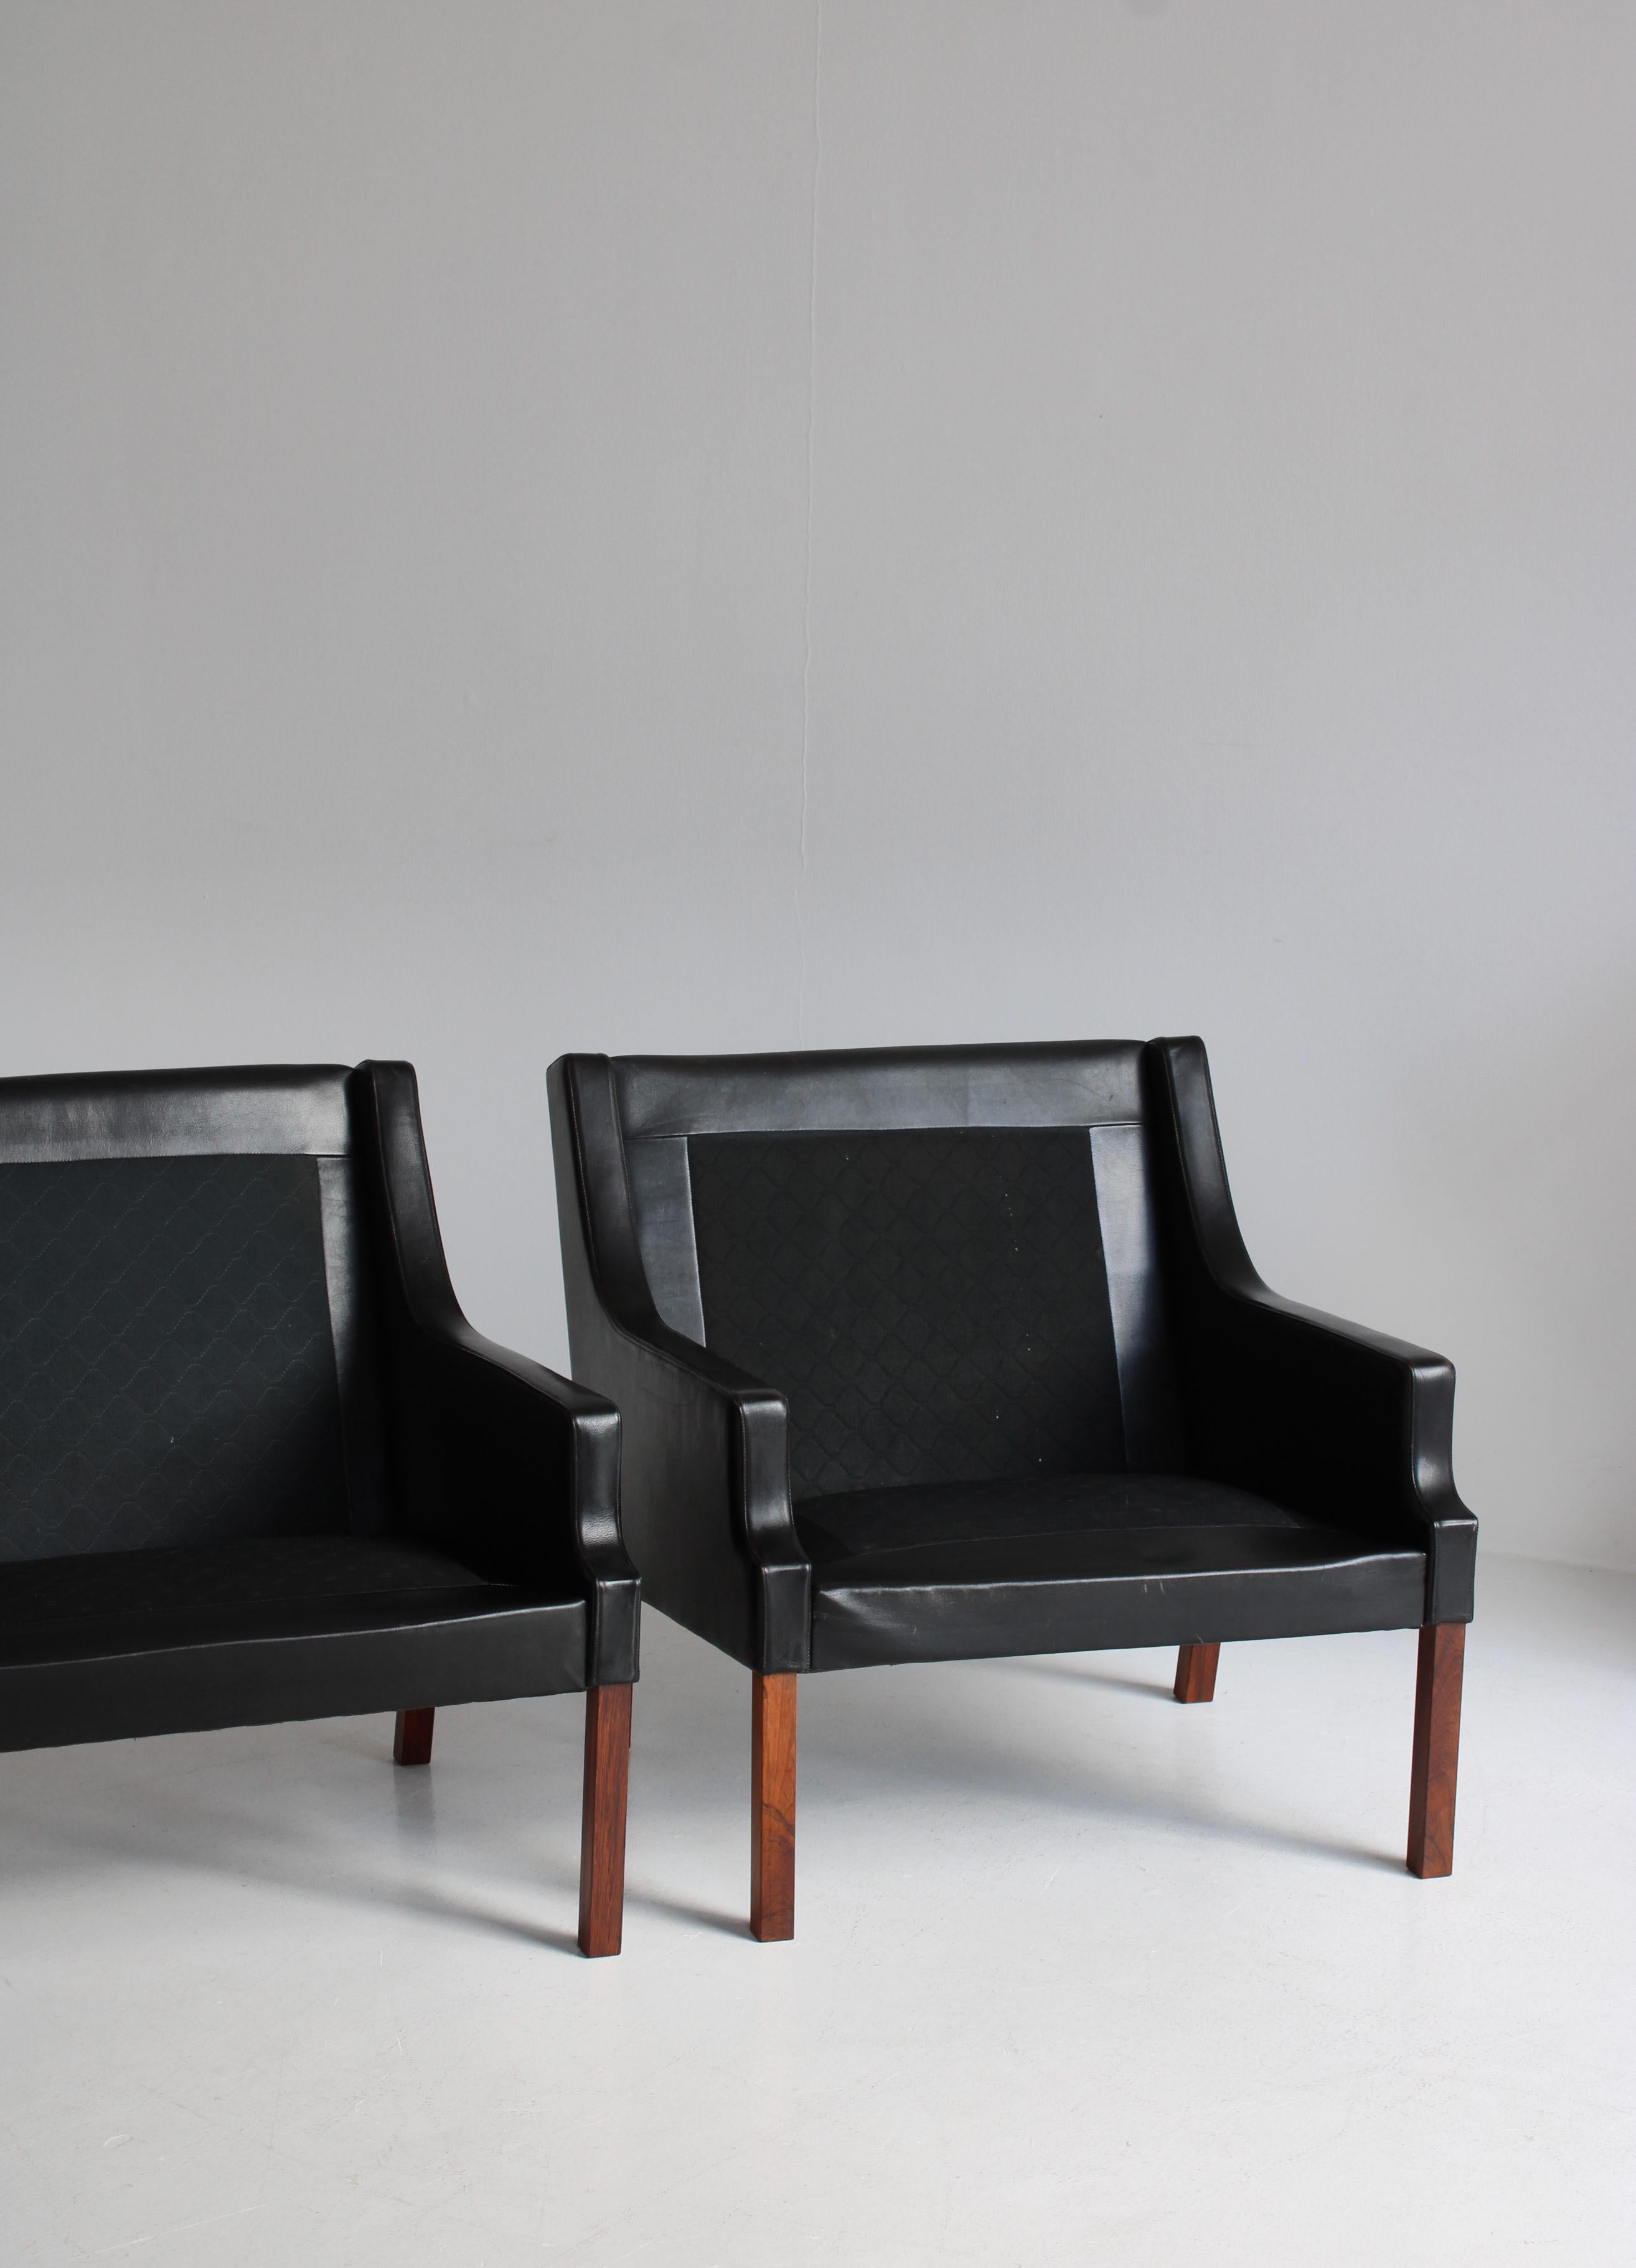 Set of Danish Modern Lounge Chairs in Black Leather by Rud Thygesen, 1966 10